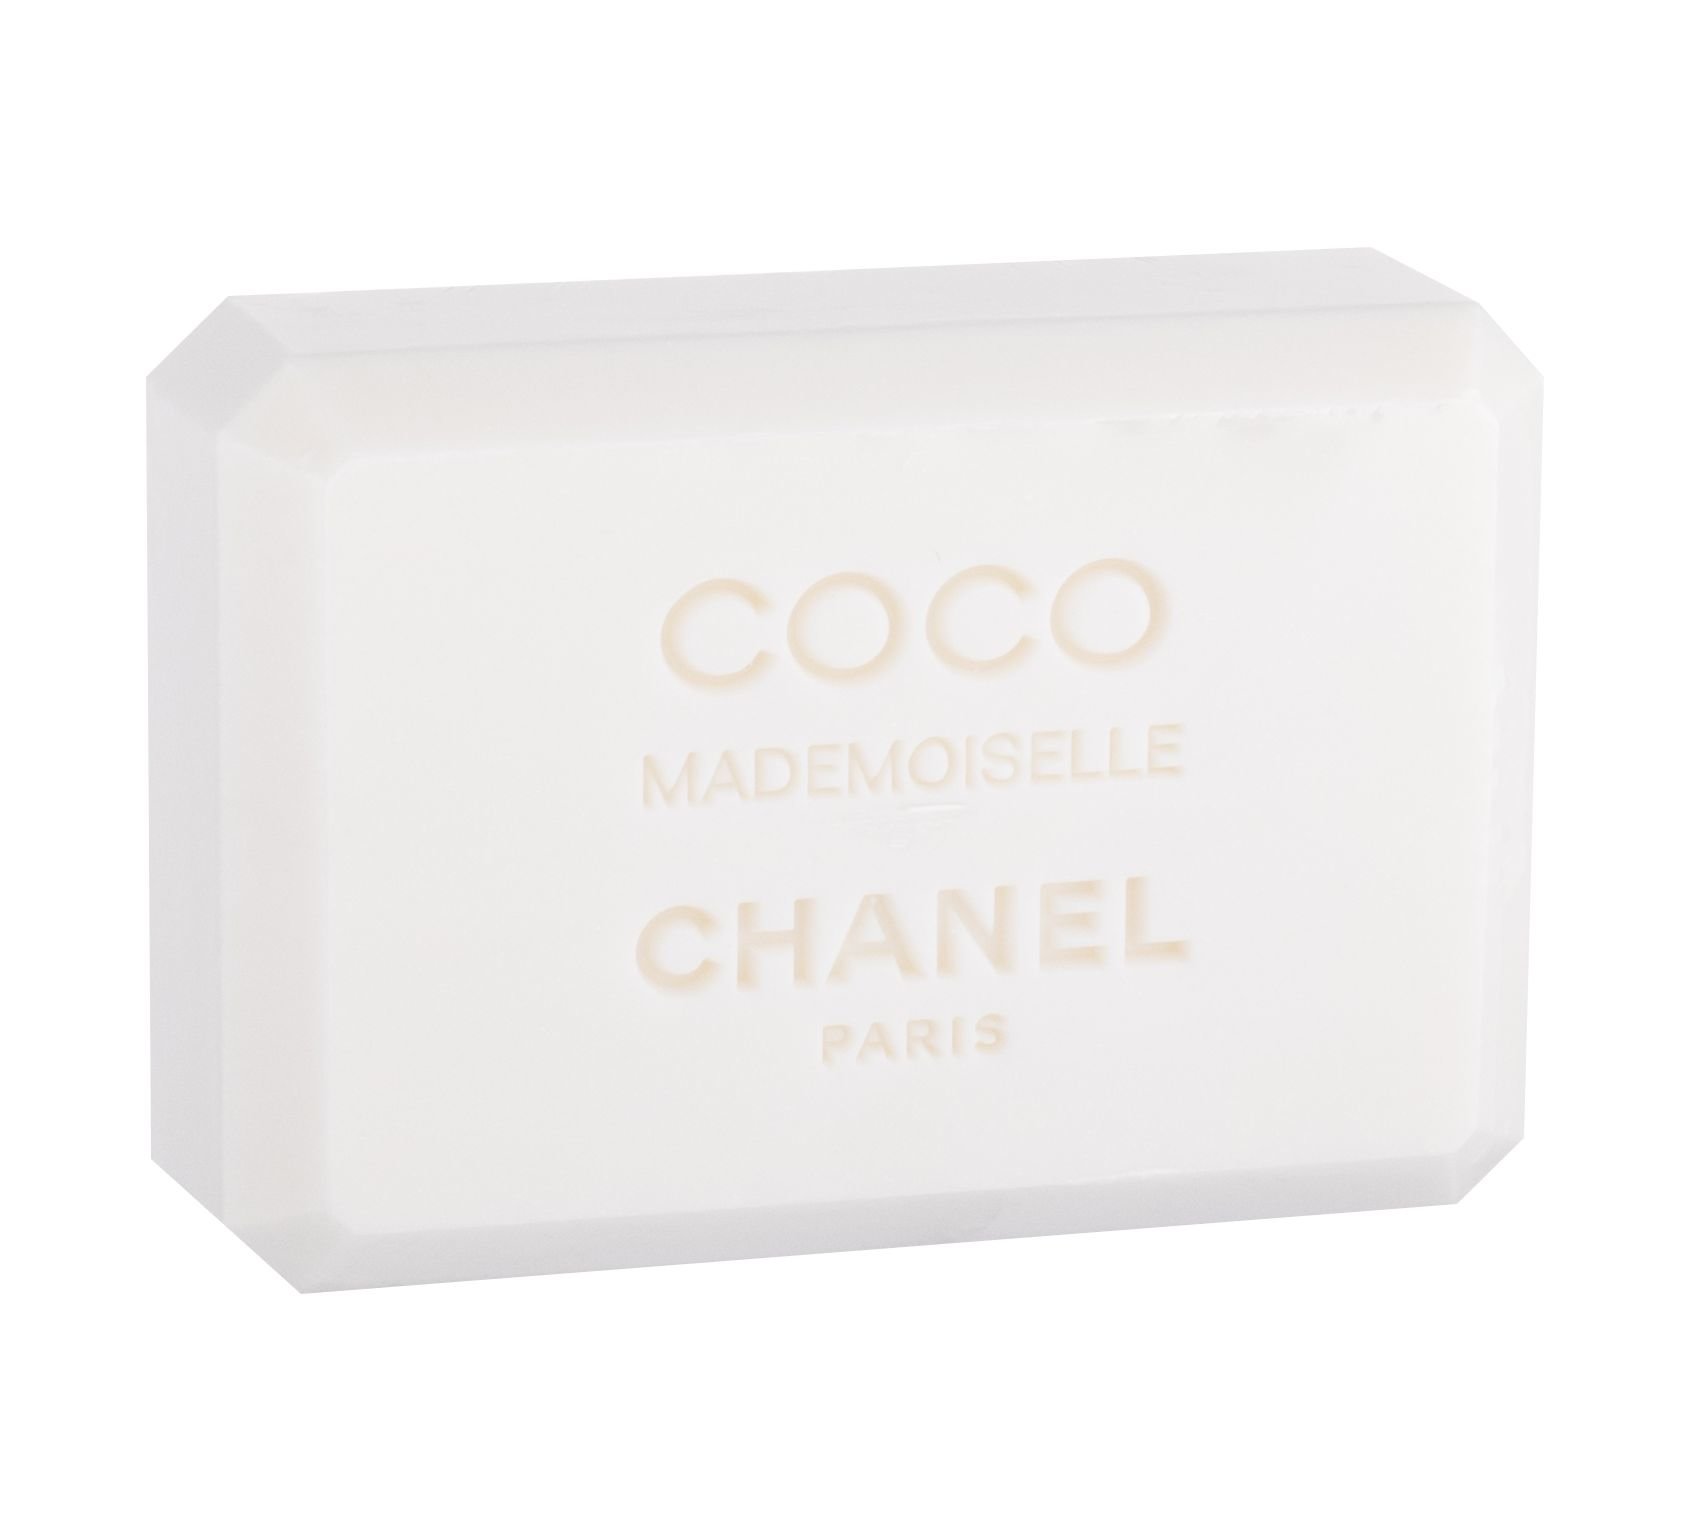 Chanel Coco Mademoiselle 150g muilas